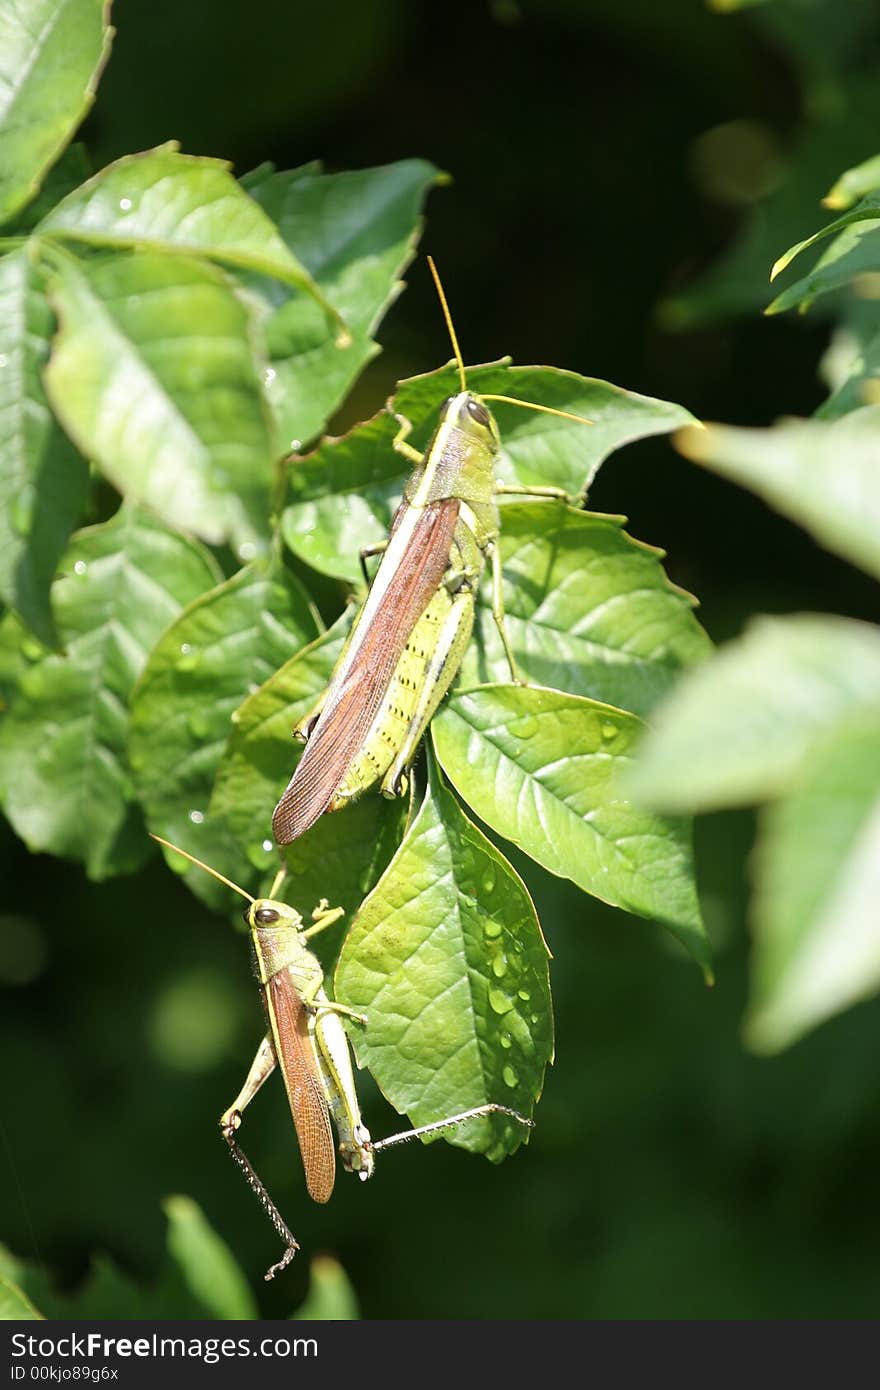 Two grasshoppers on a green leaf